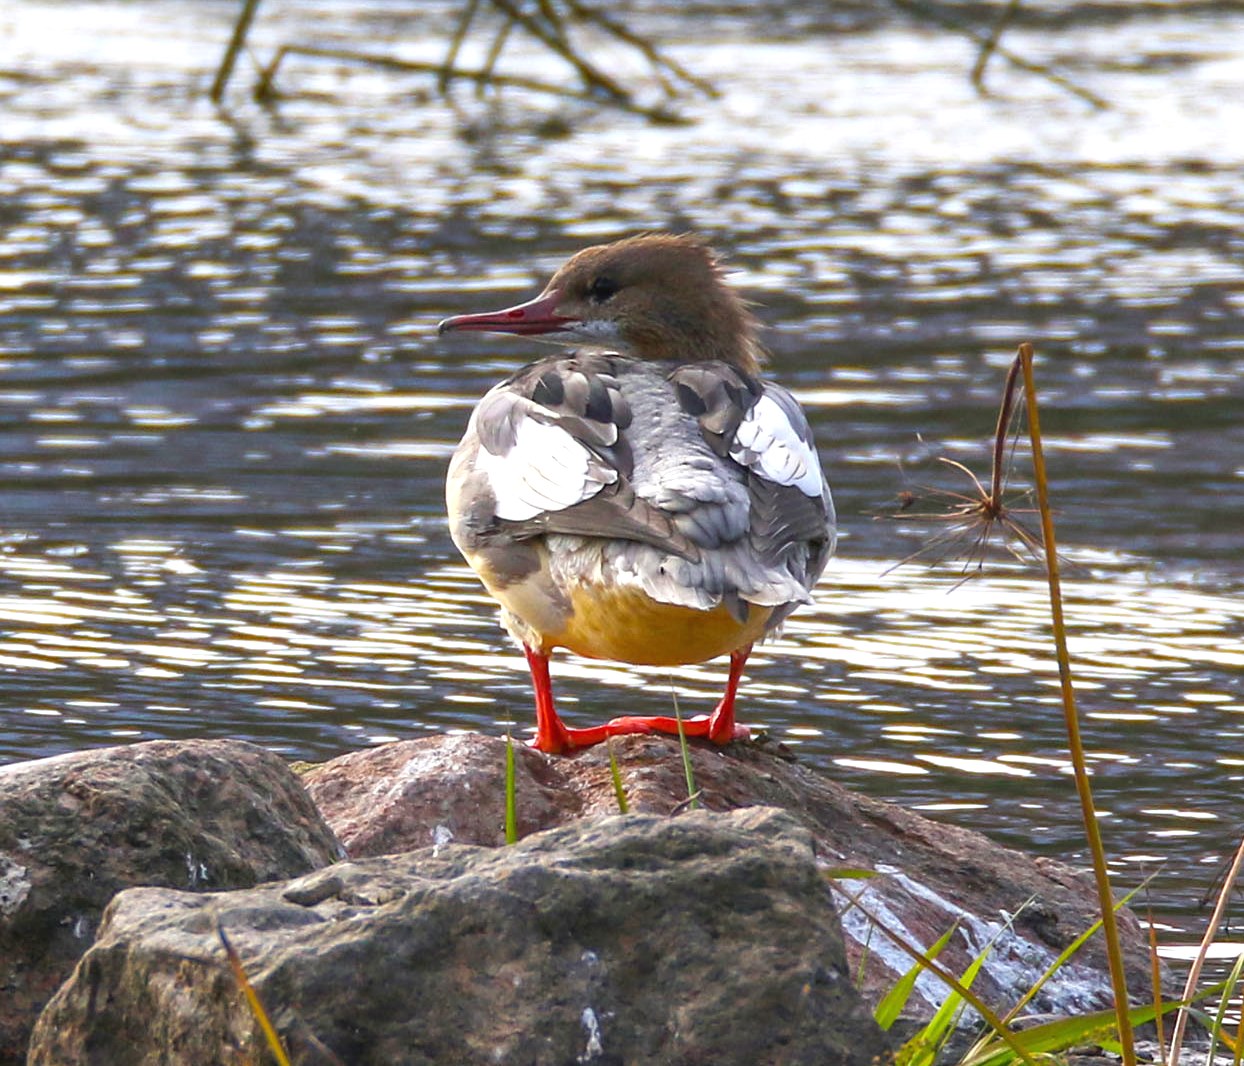 Flocks of wintering waterfowl are already observed in Kaunas